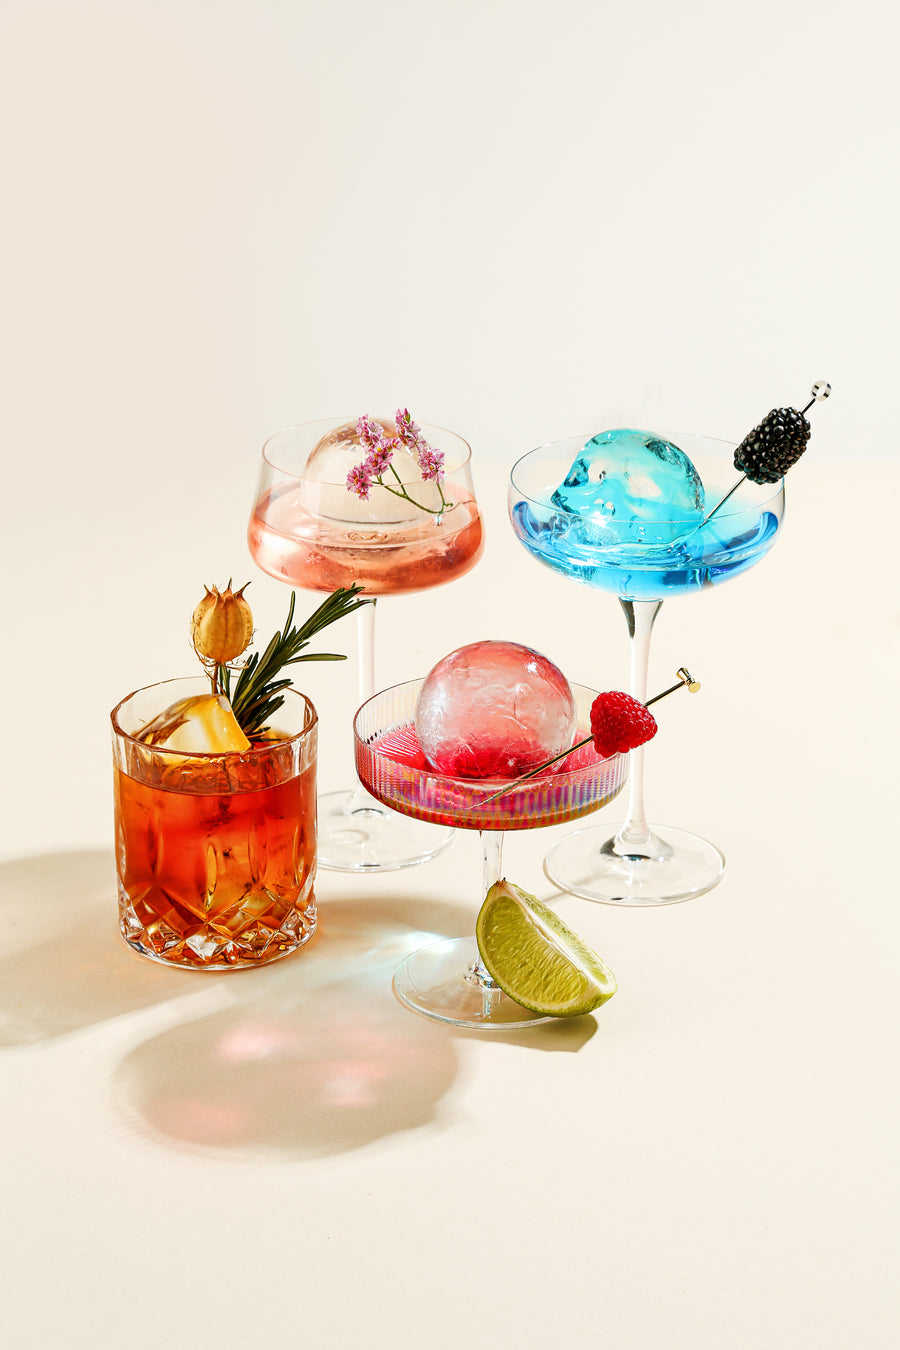 Infusing Ice Cubes Can Level Up Your Cocktails